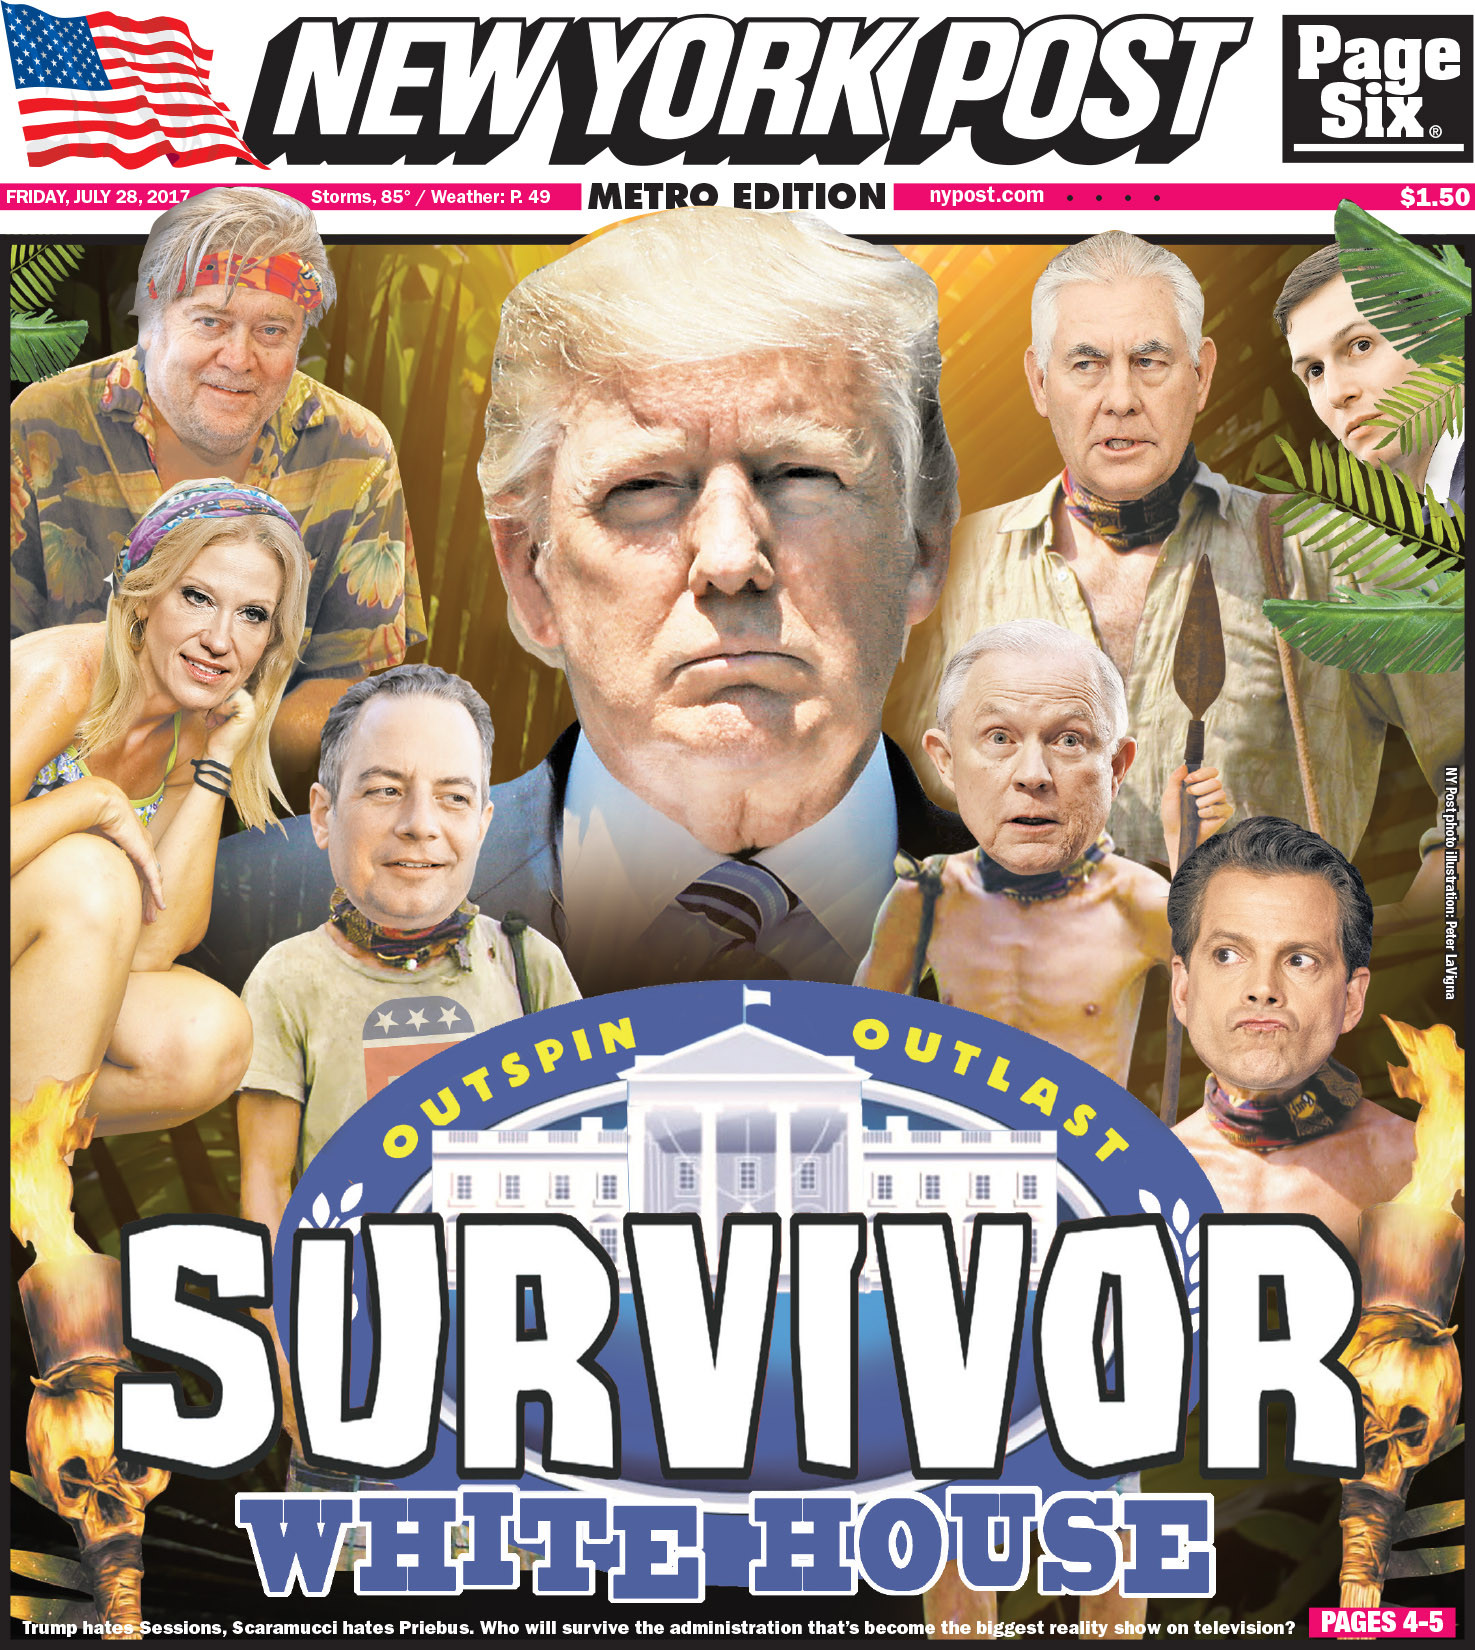 New York Post Cover July 